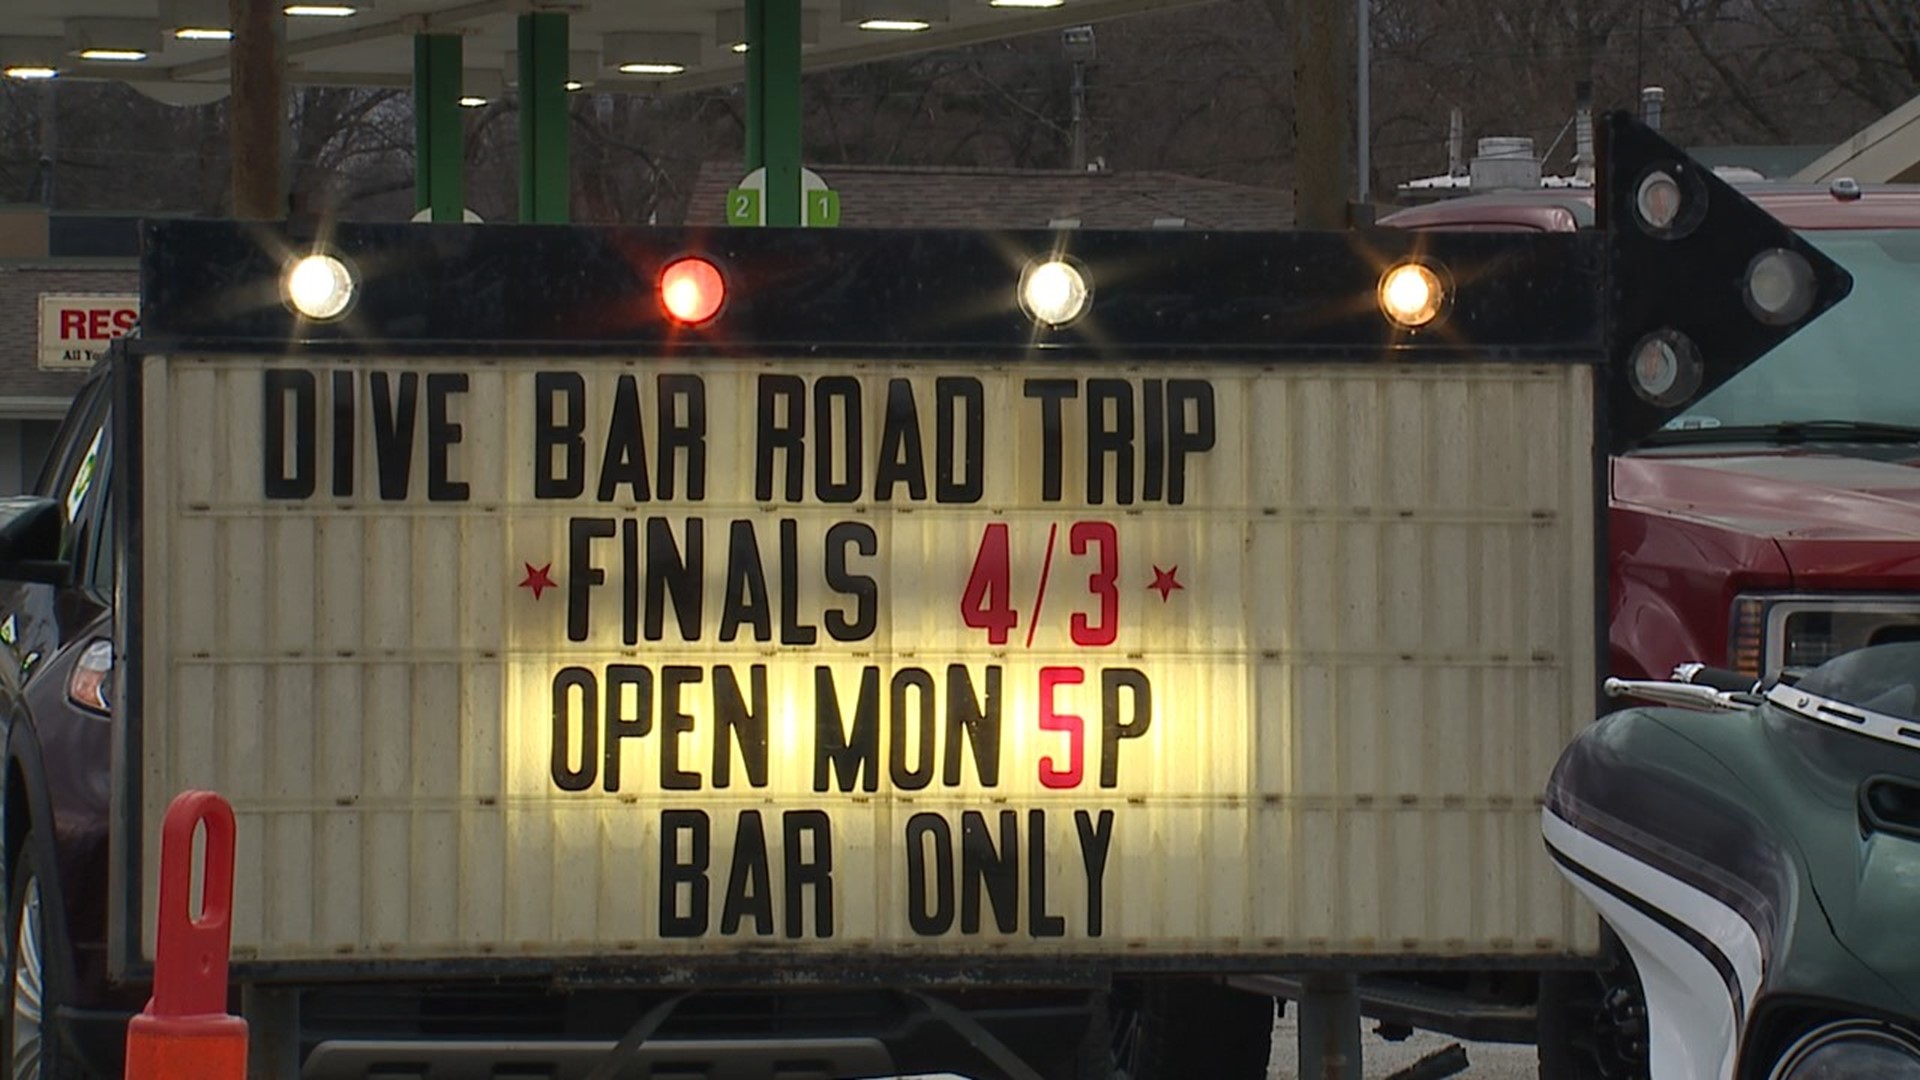 The Edge Eatery and Drinkatorium started out as one of 128 dive bars competing in Dive Bar Road Trip's March Dive-ness bracket.